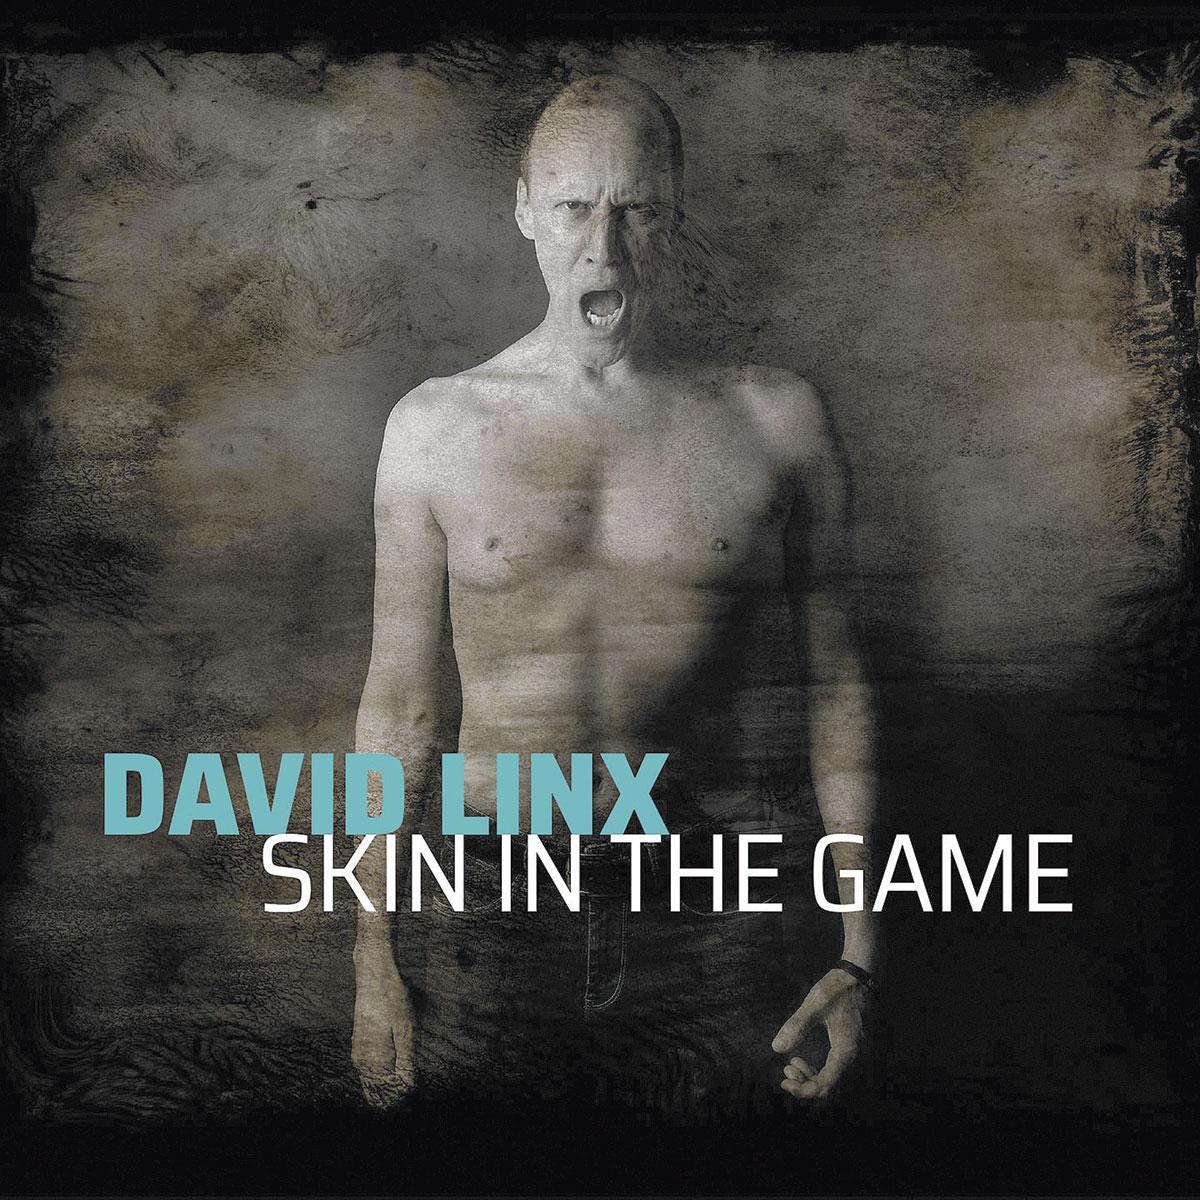 (2) Skin In The Game, chez Crystal Records.